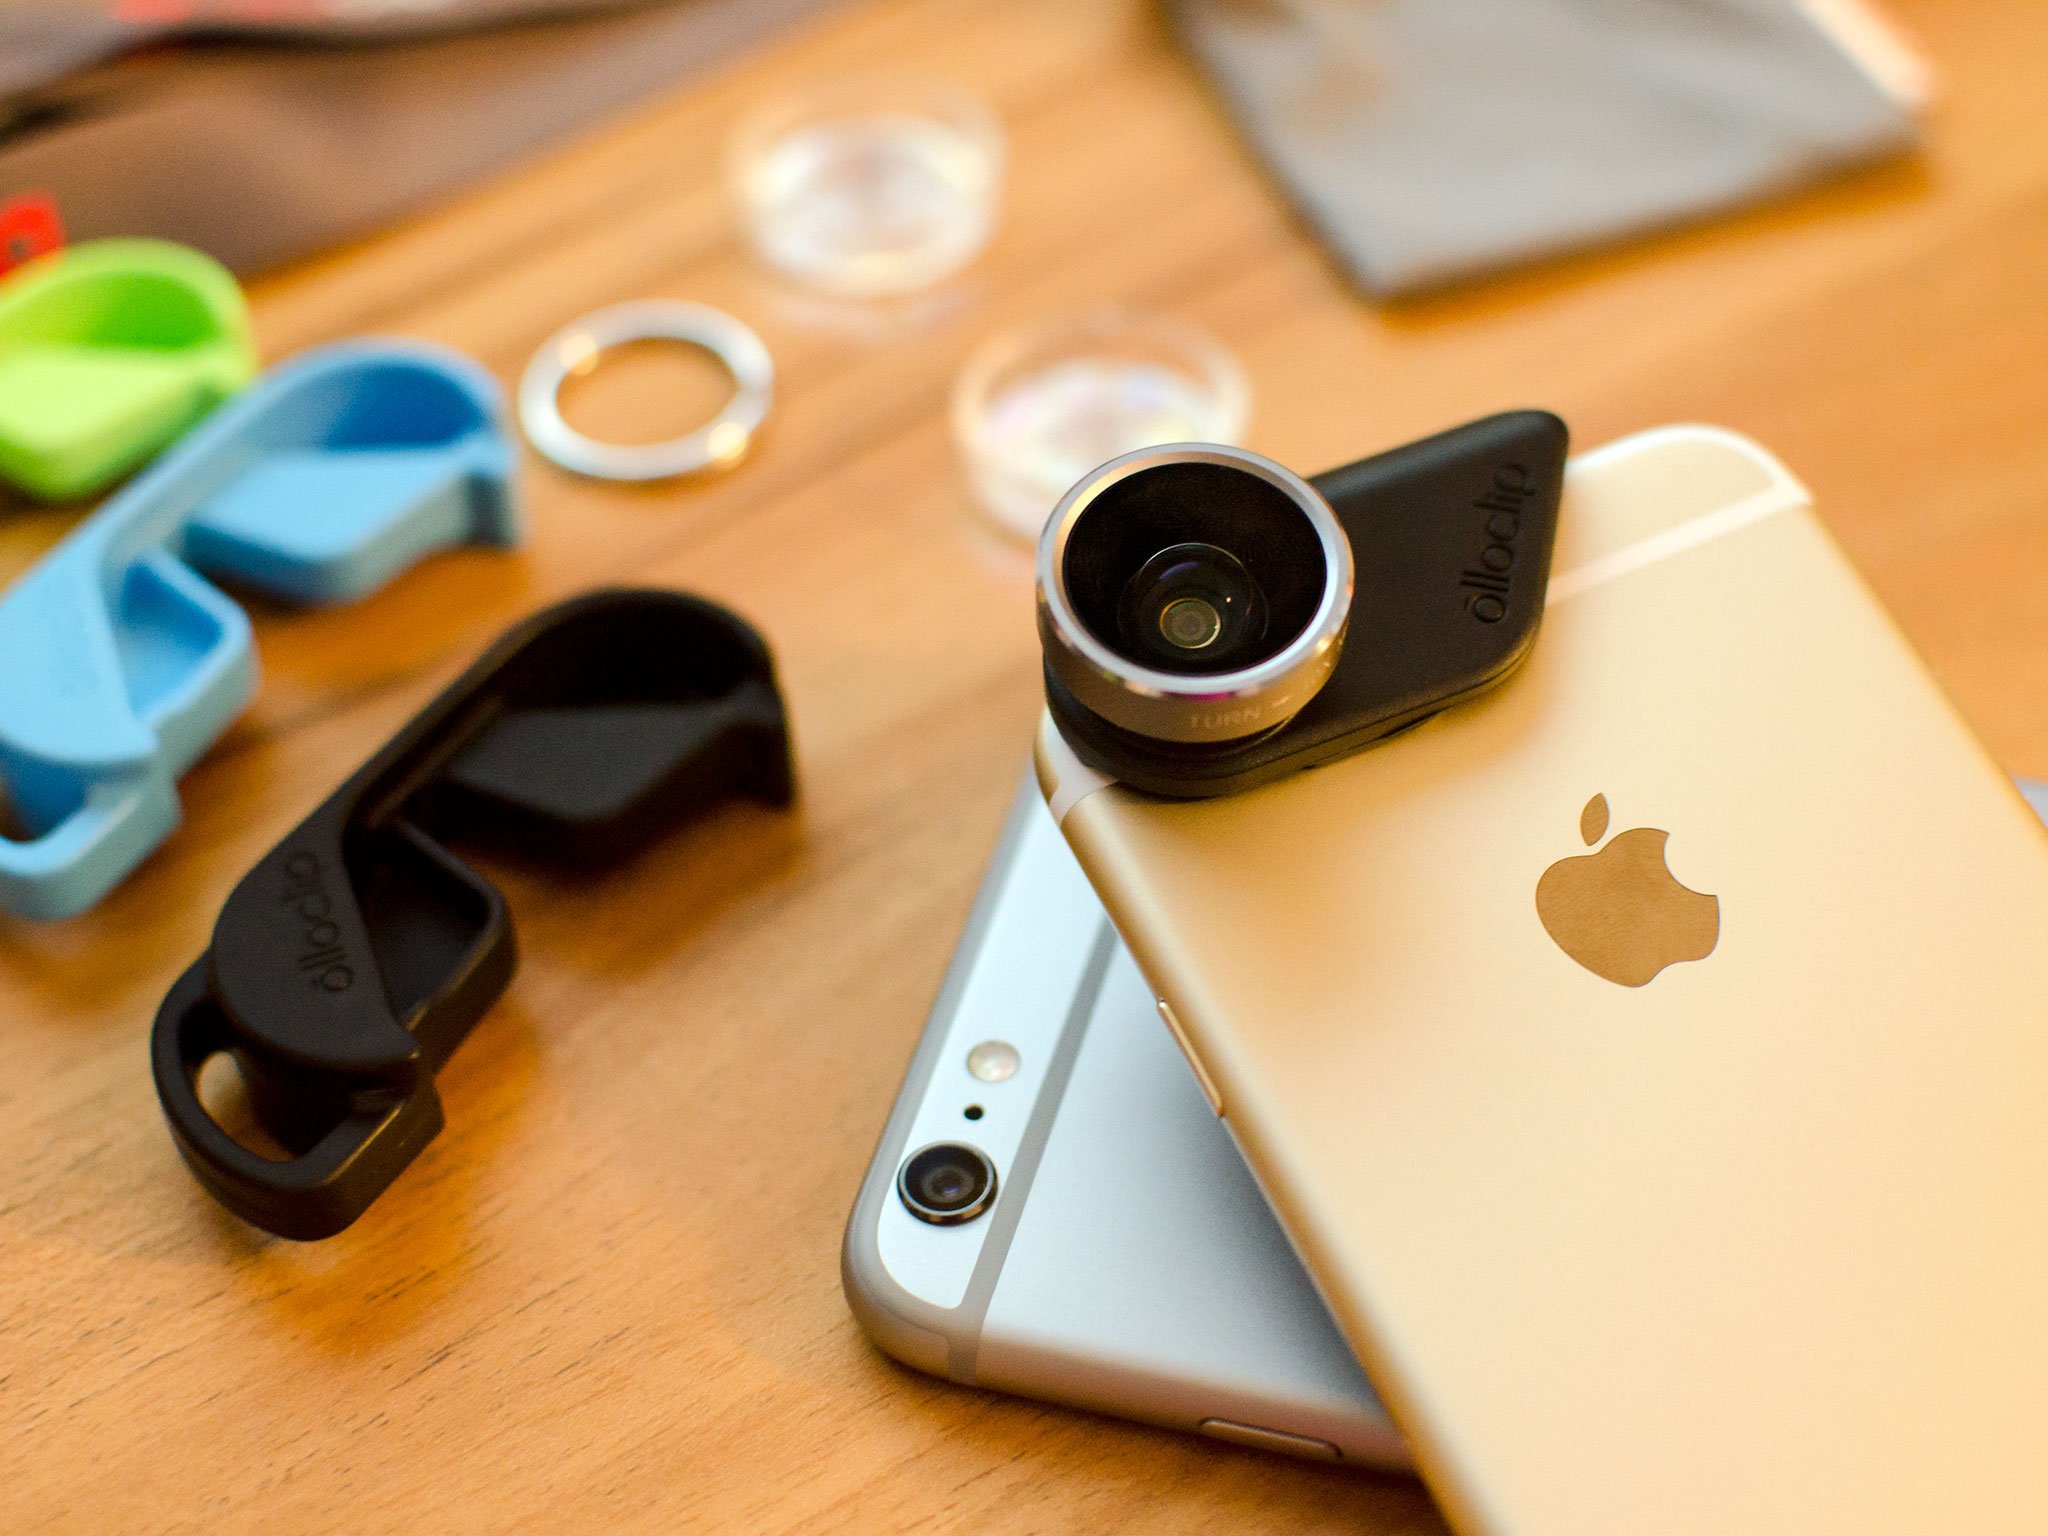 mate Knead alcohol Olloclip for iPhone 6 and iPhone 6 Plus review | iMore